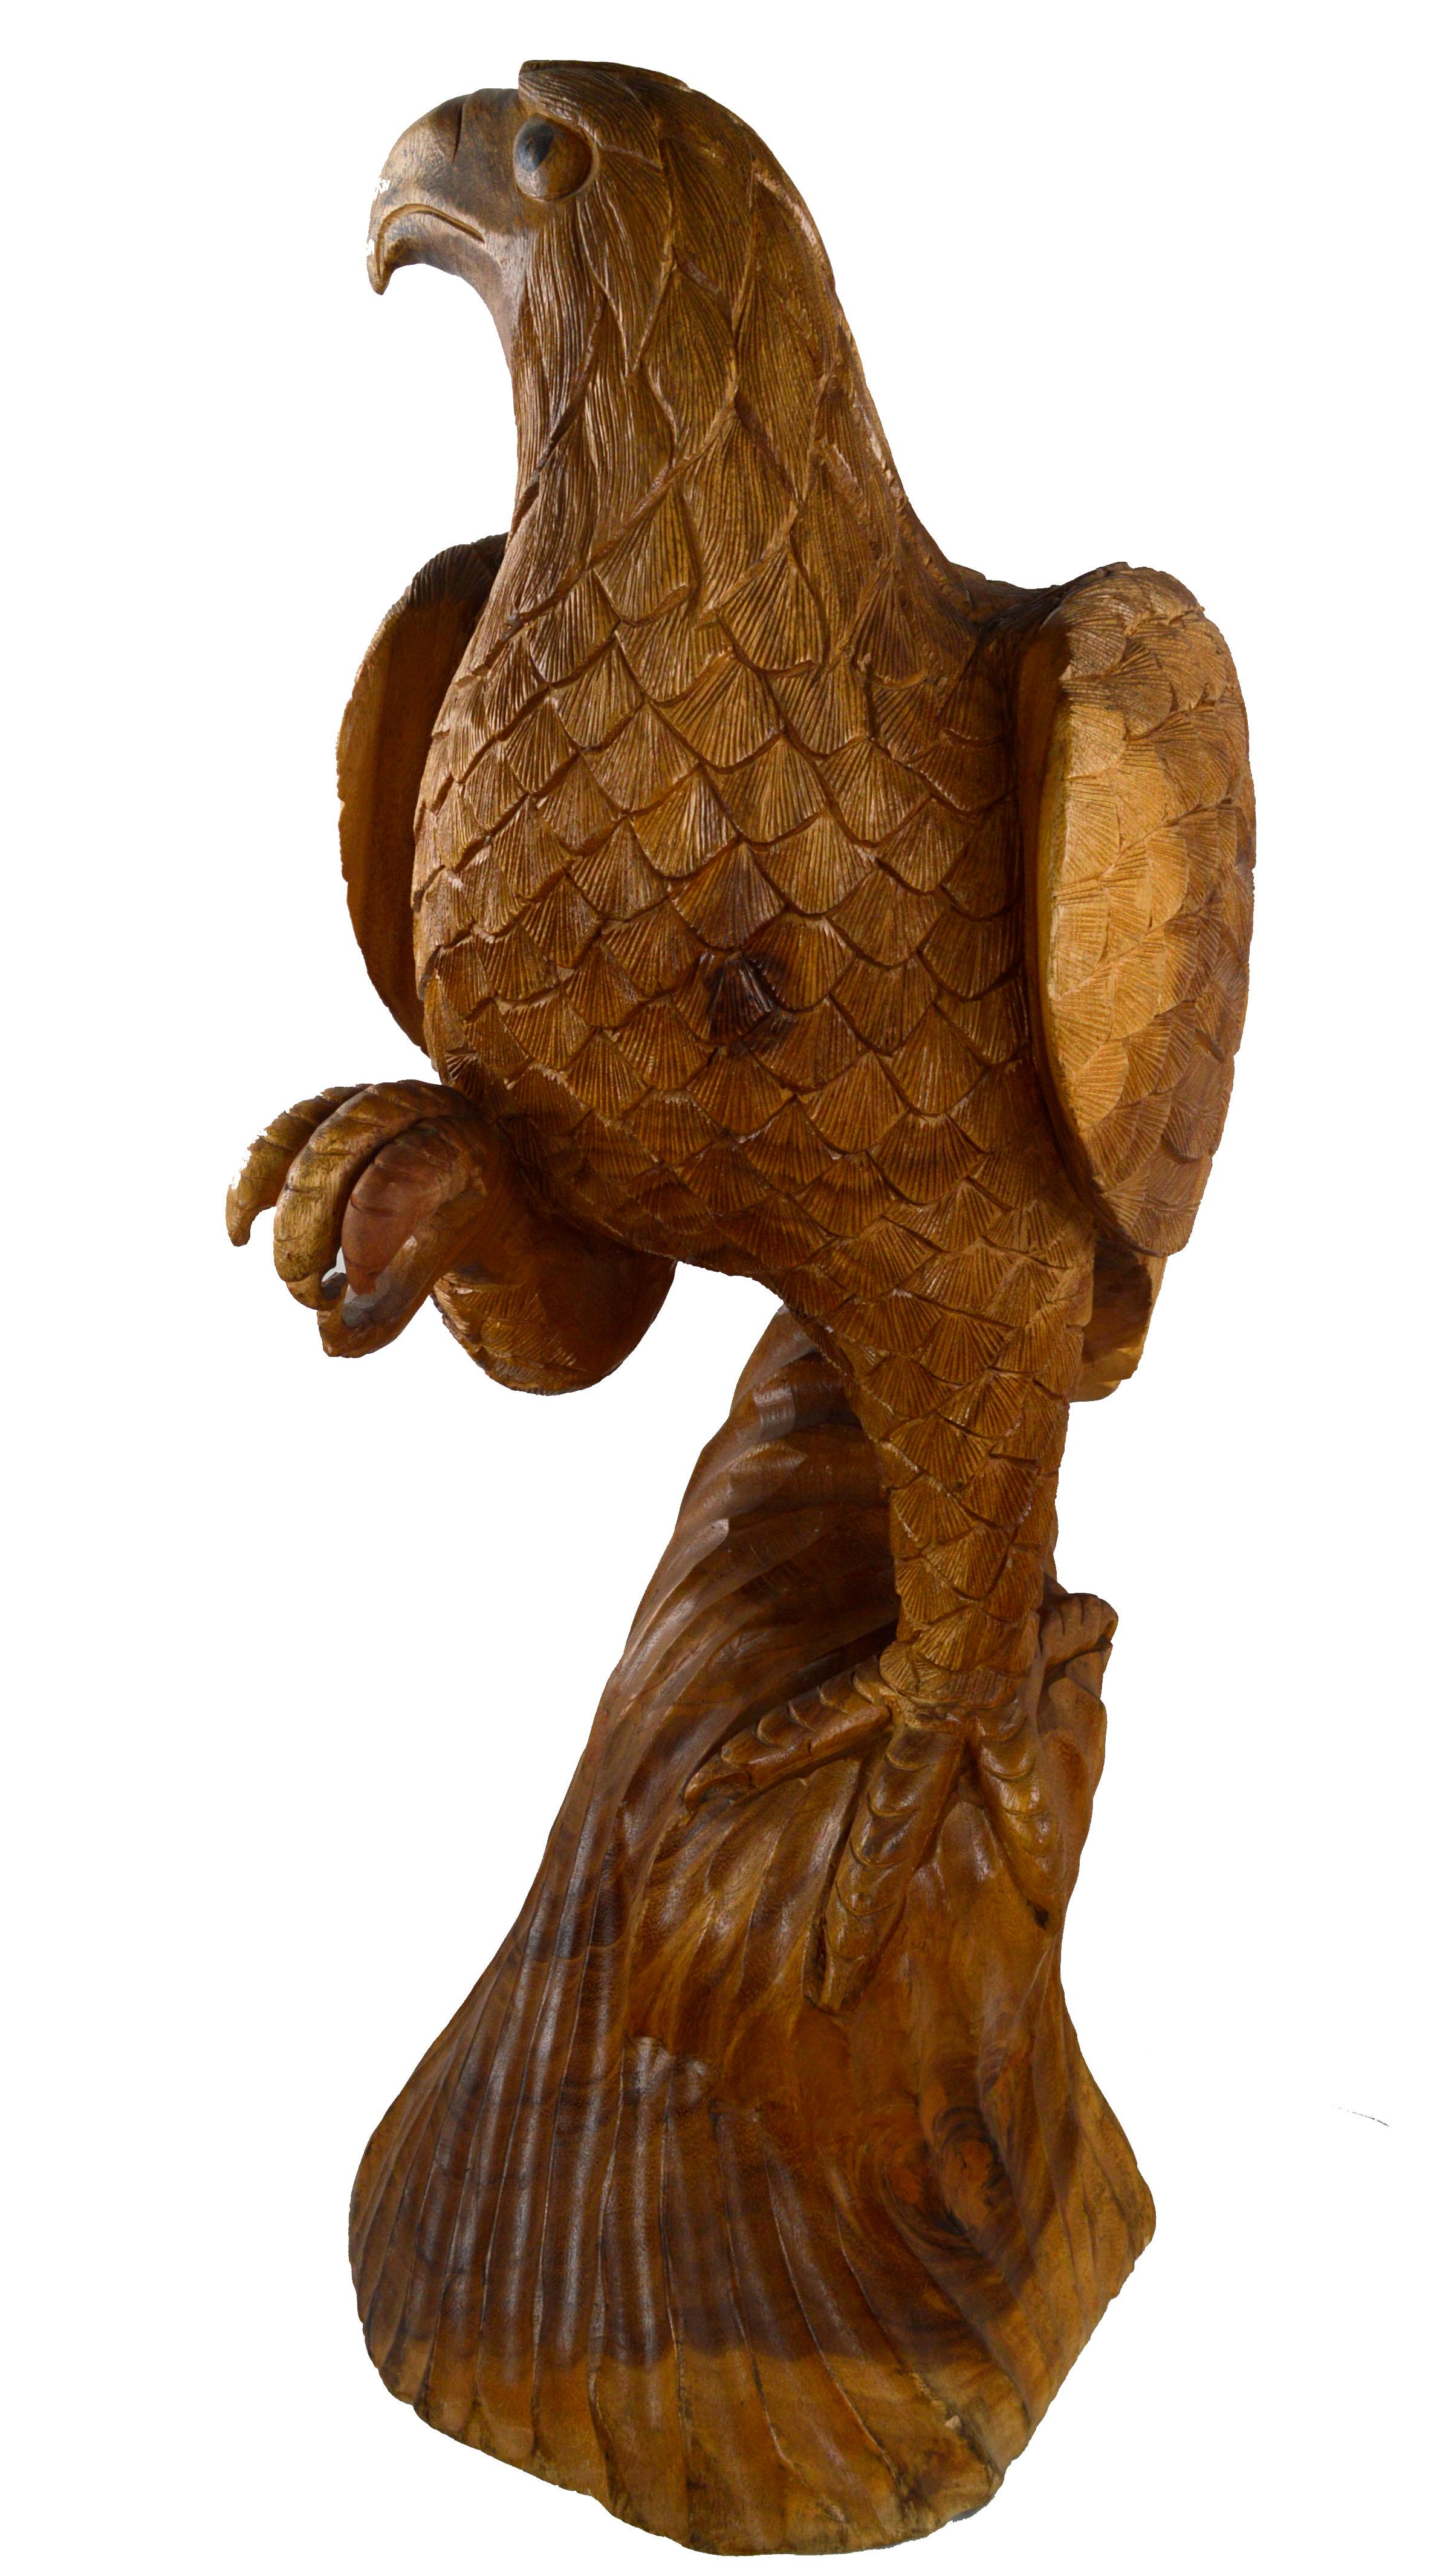 Hand Carved Wood Eagle Sculpture - Brown Figurative Sculpture by Unknown